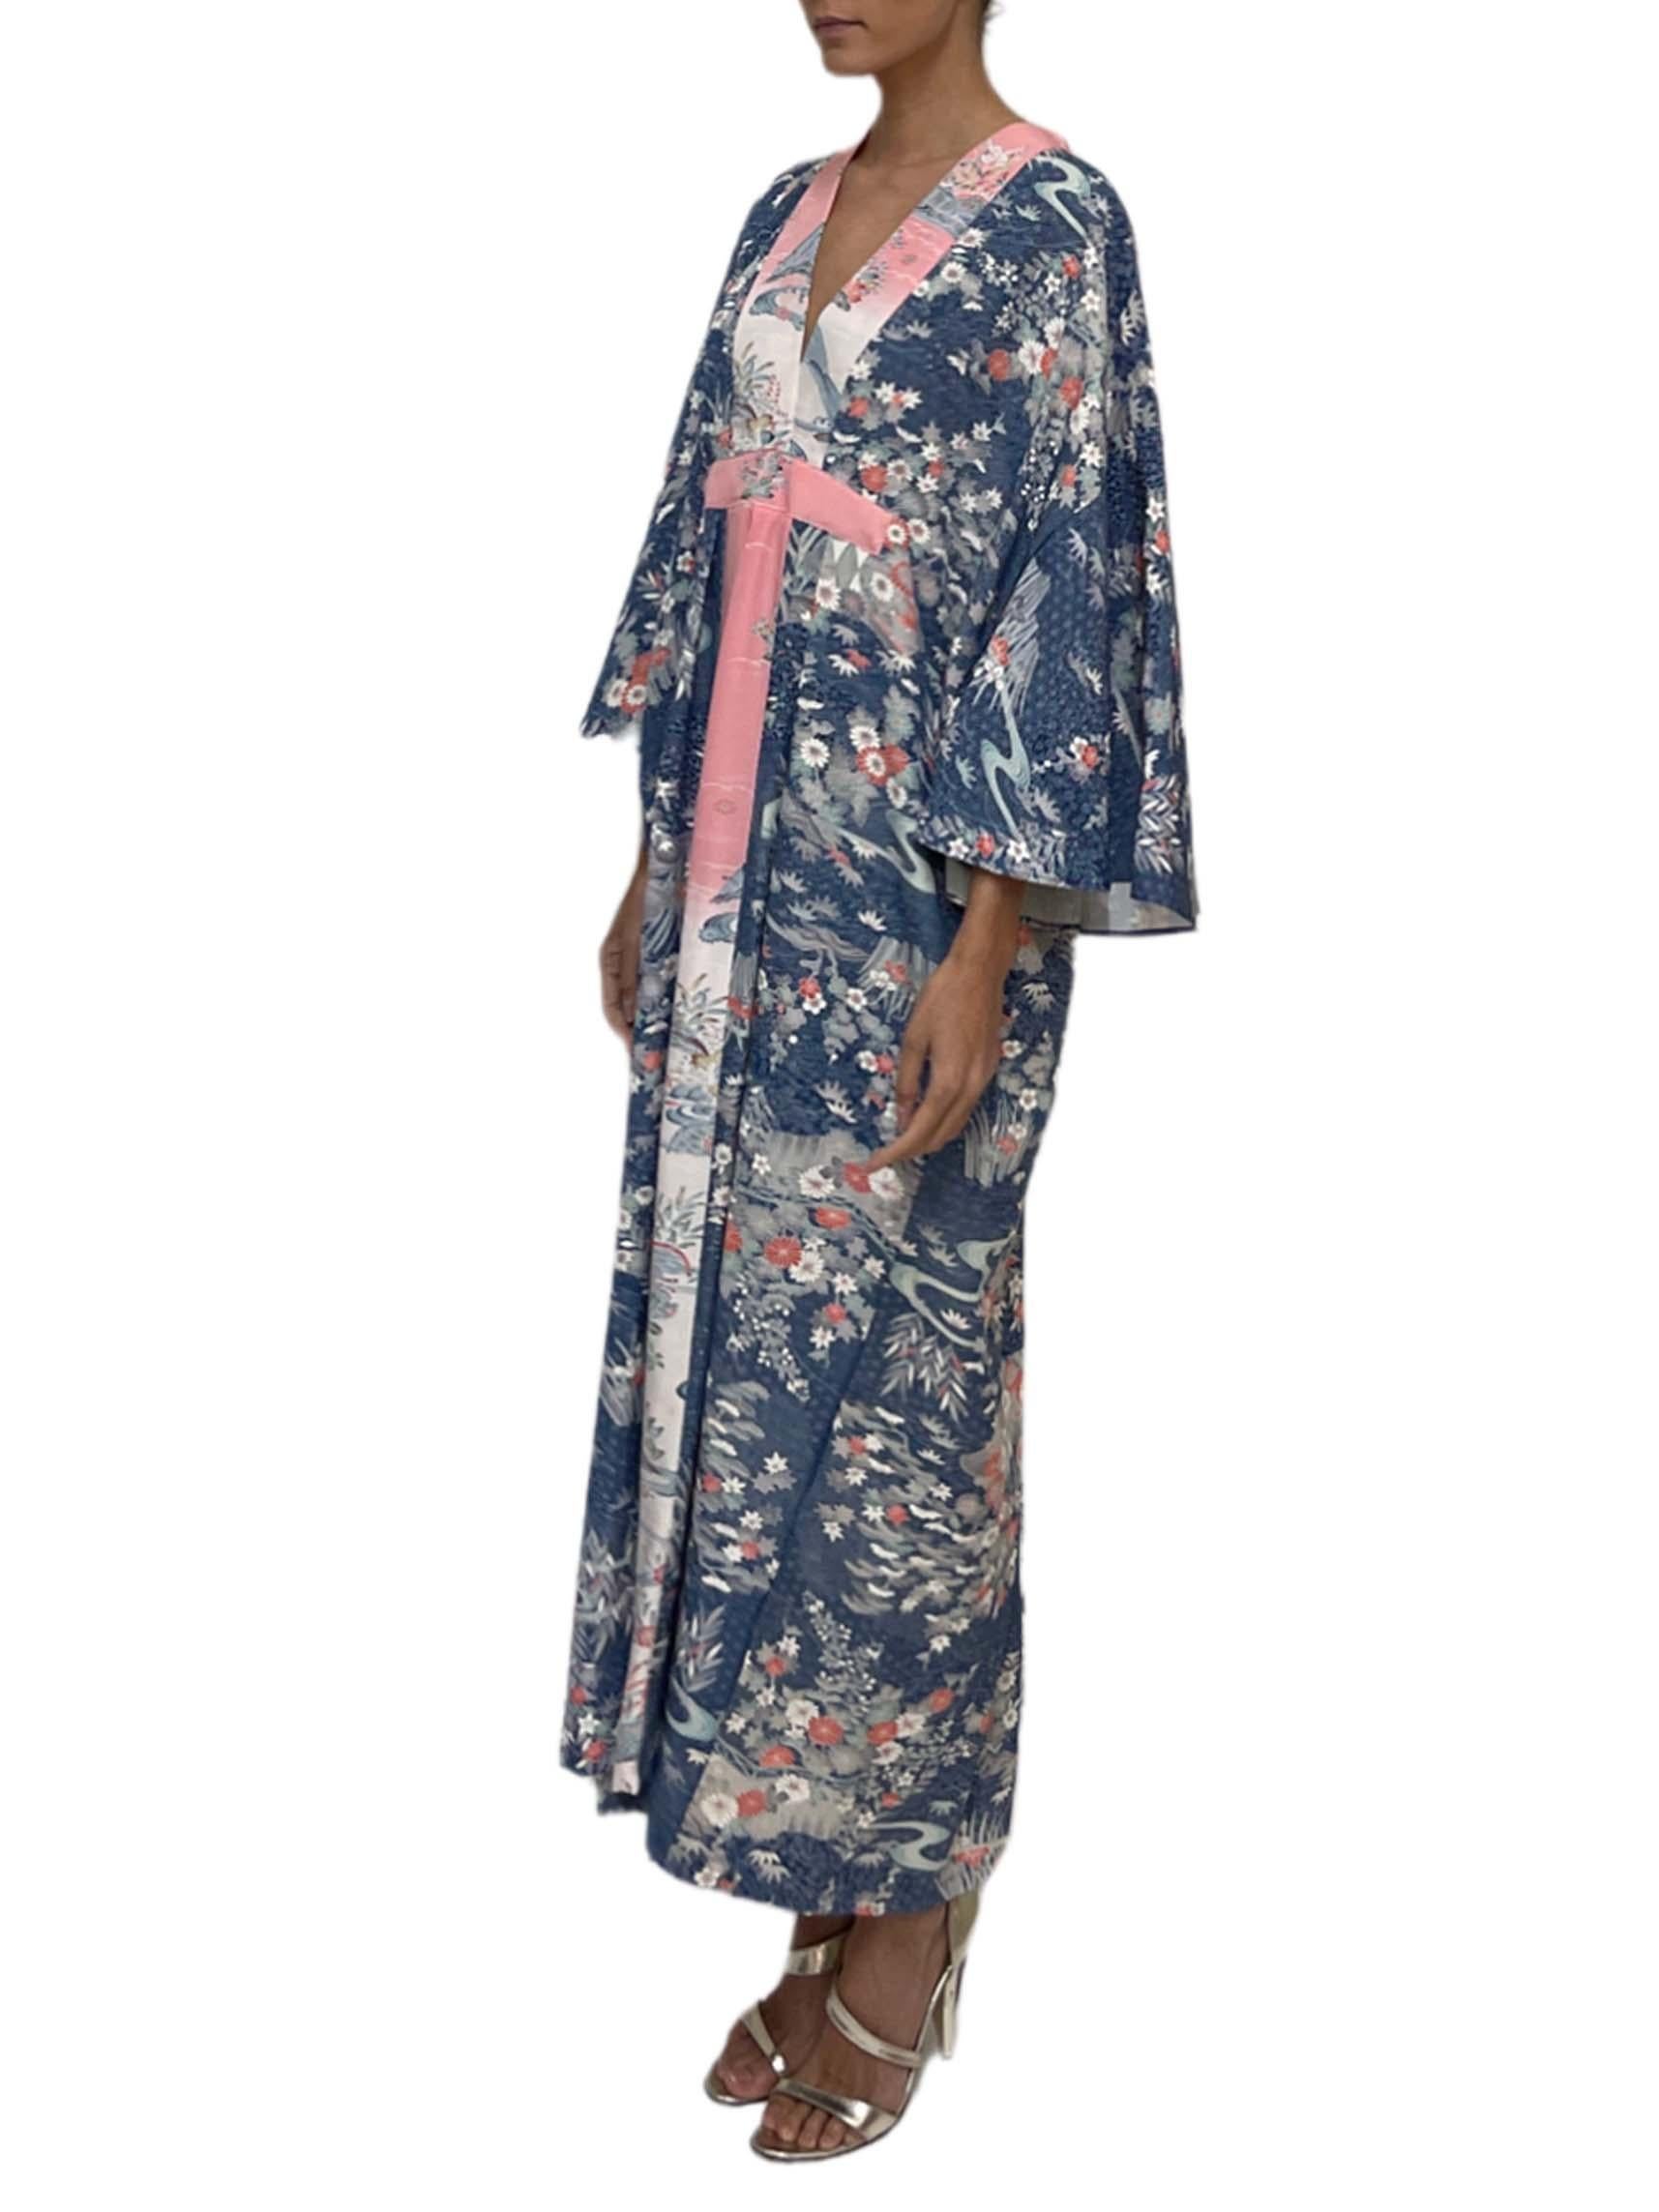 MORPHEW COLLECTION Navy Blue, White & Pink Floral Japanese Kimono Silk Kaftan In Excellent Condition For Sale In New York, NY